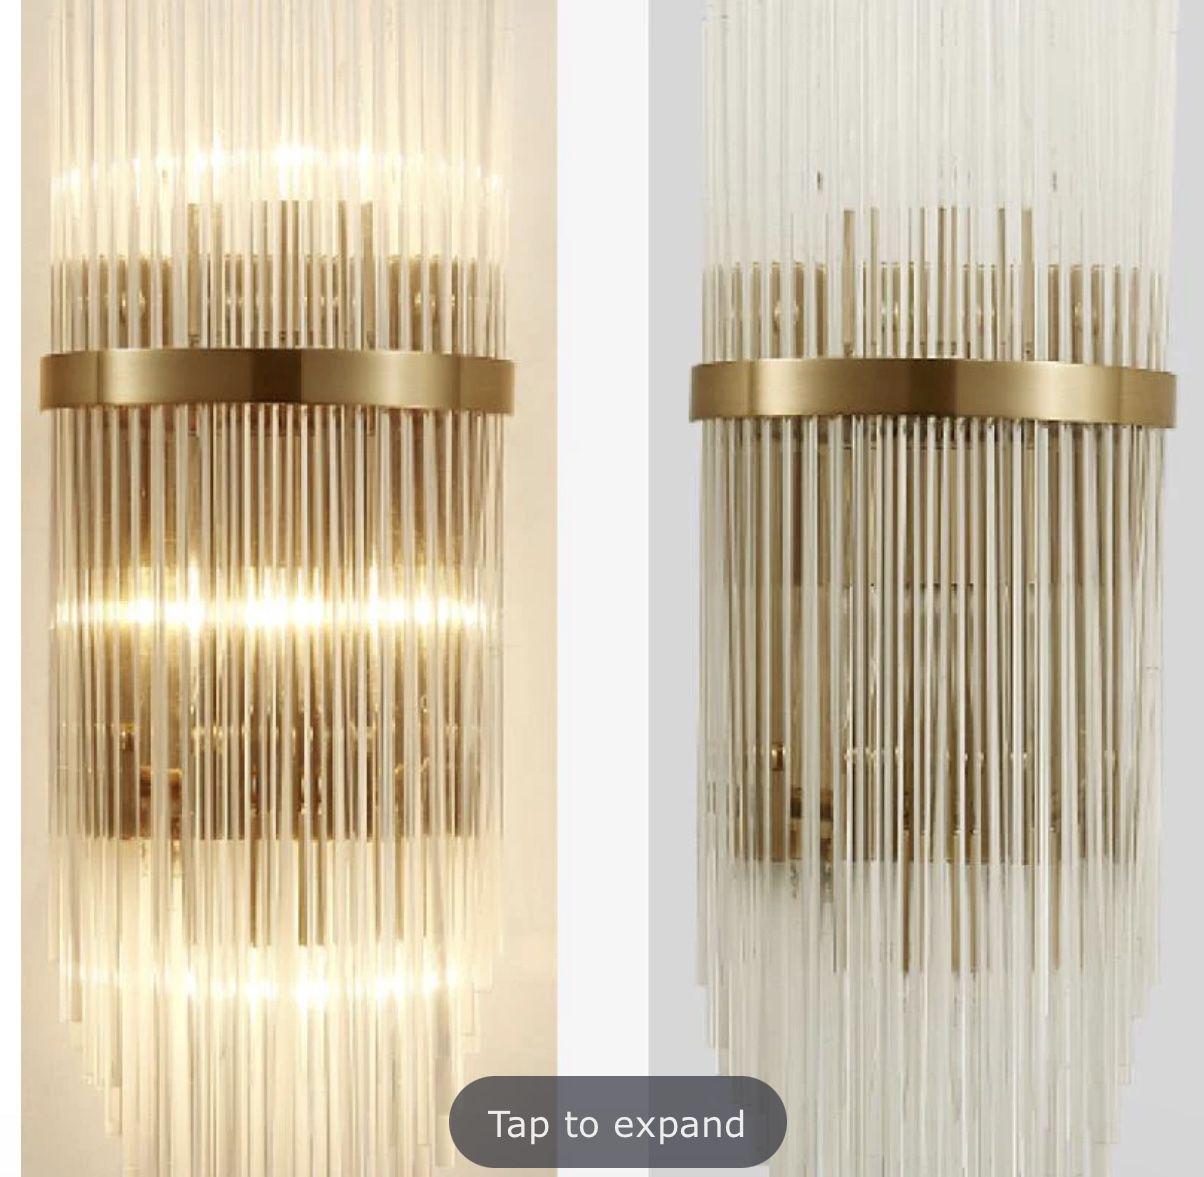 Two : Crystal Wall Sconce Wall Lamp Lighting Fixture